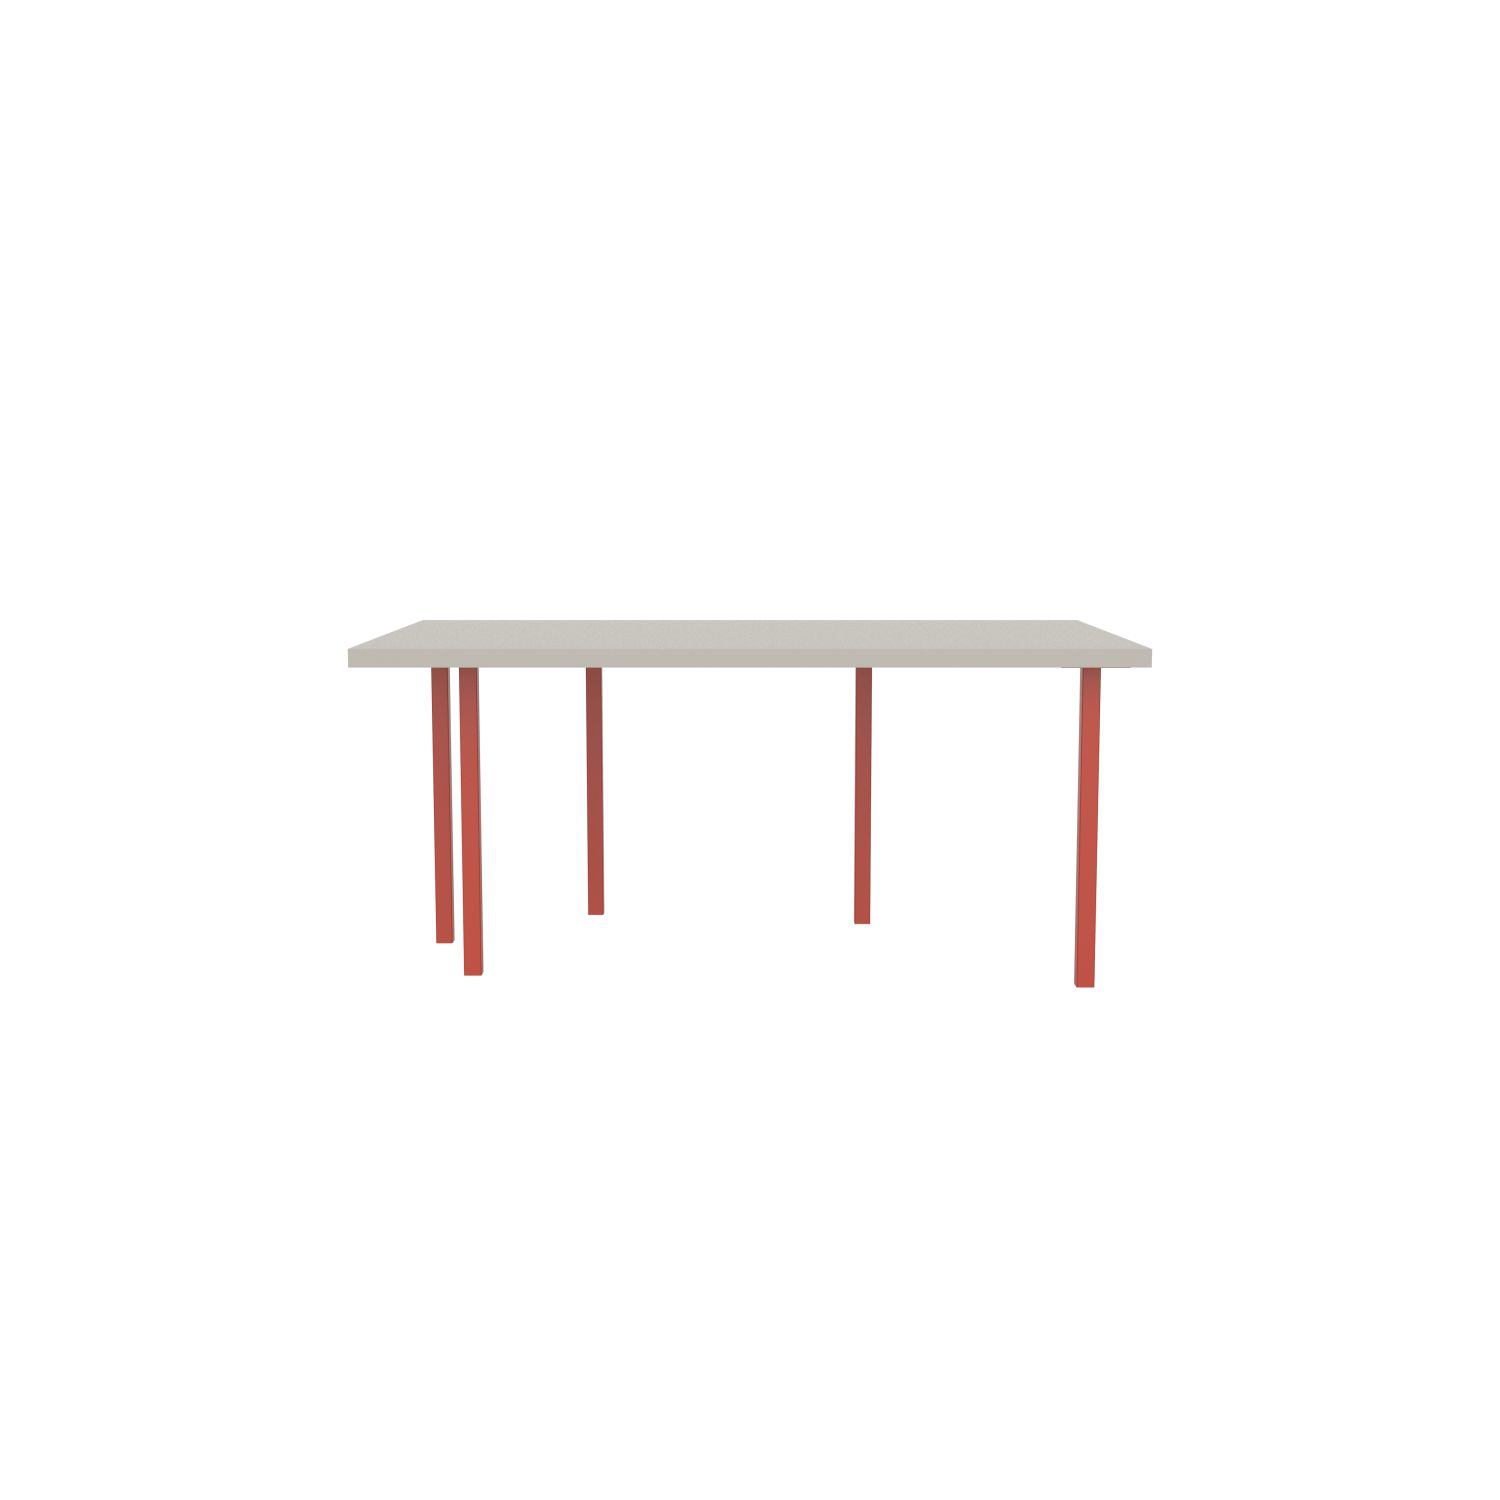 lensvelt bbrand table five fixed heigt 103x172 hpl white 50 mm price level 1 vermilion red ral2002